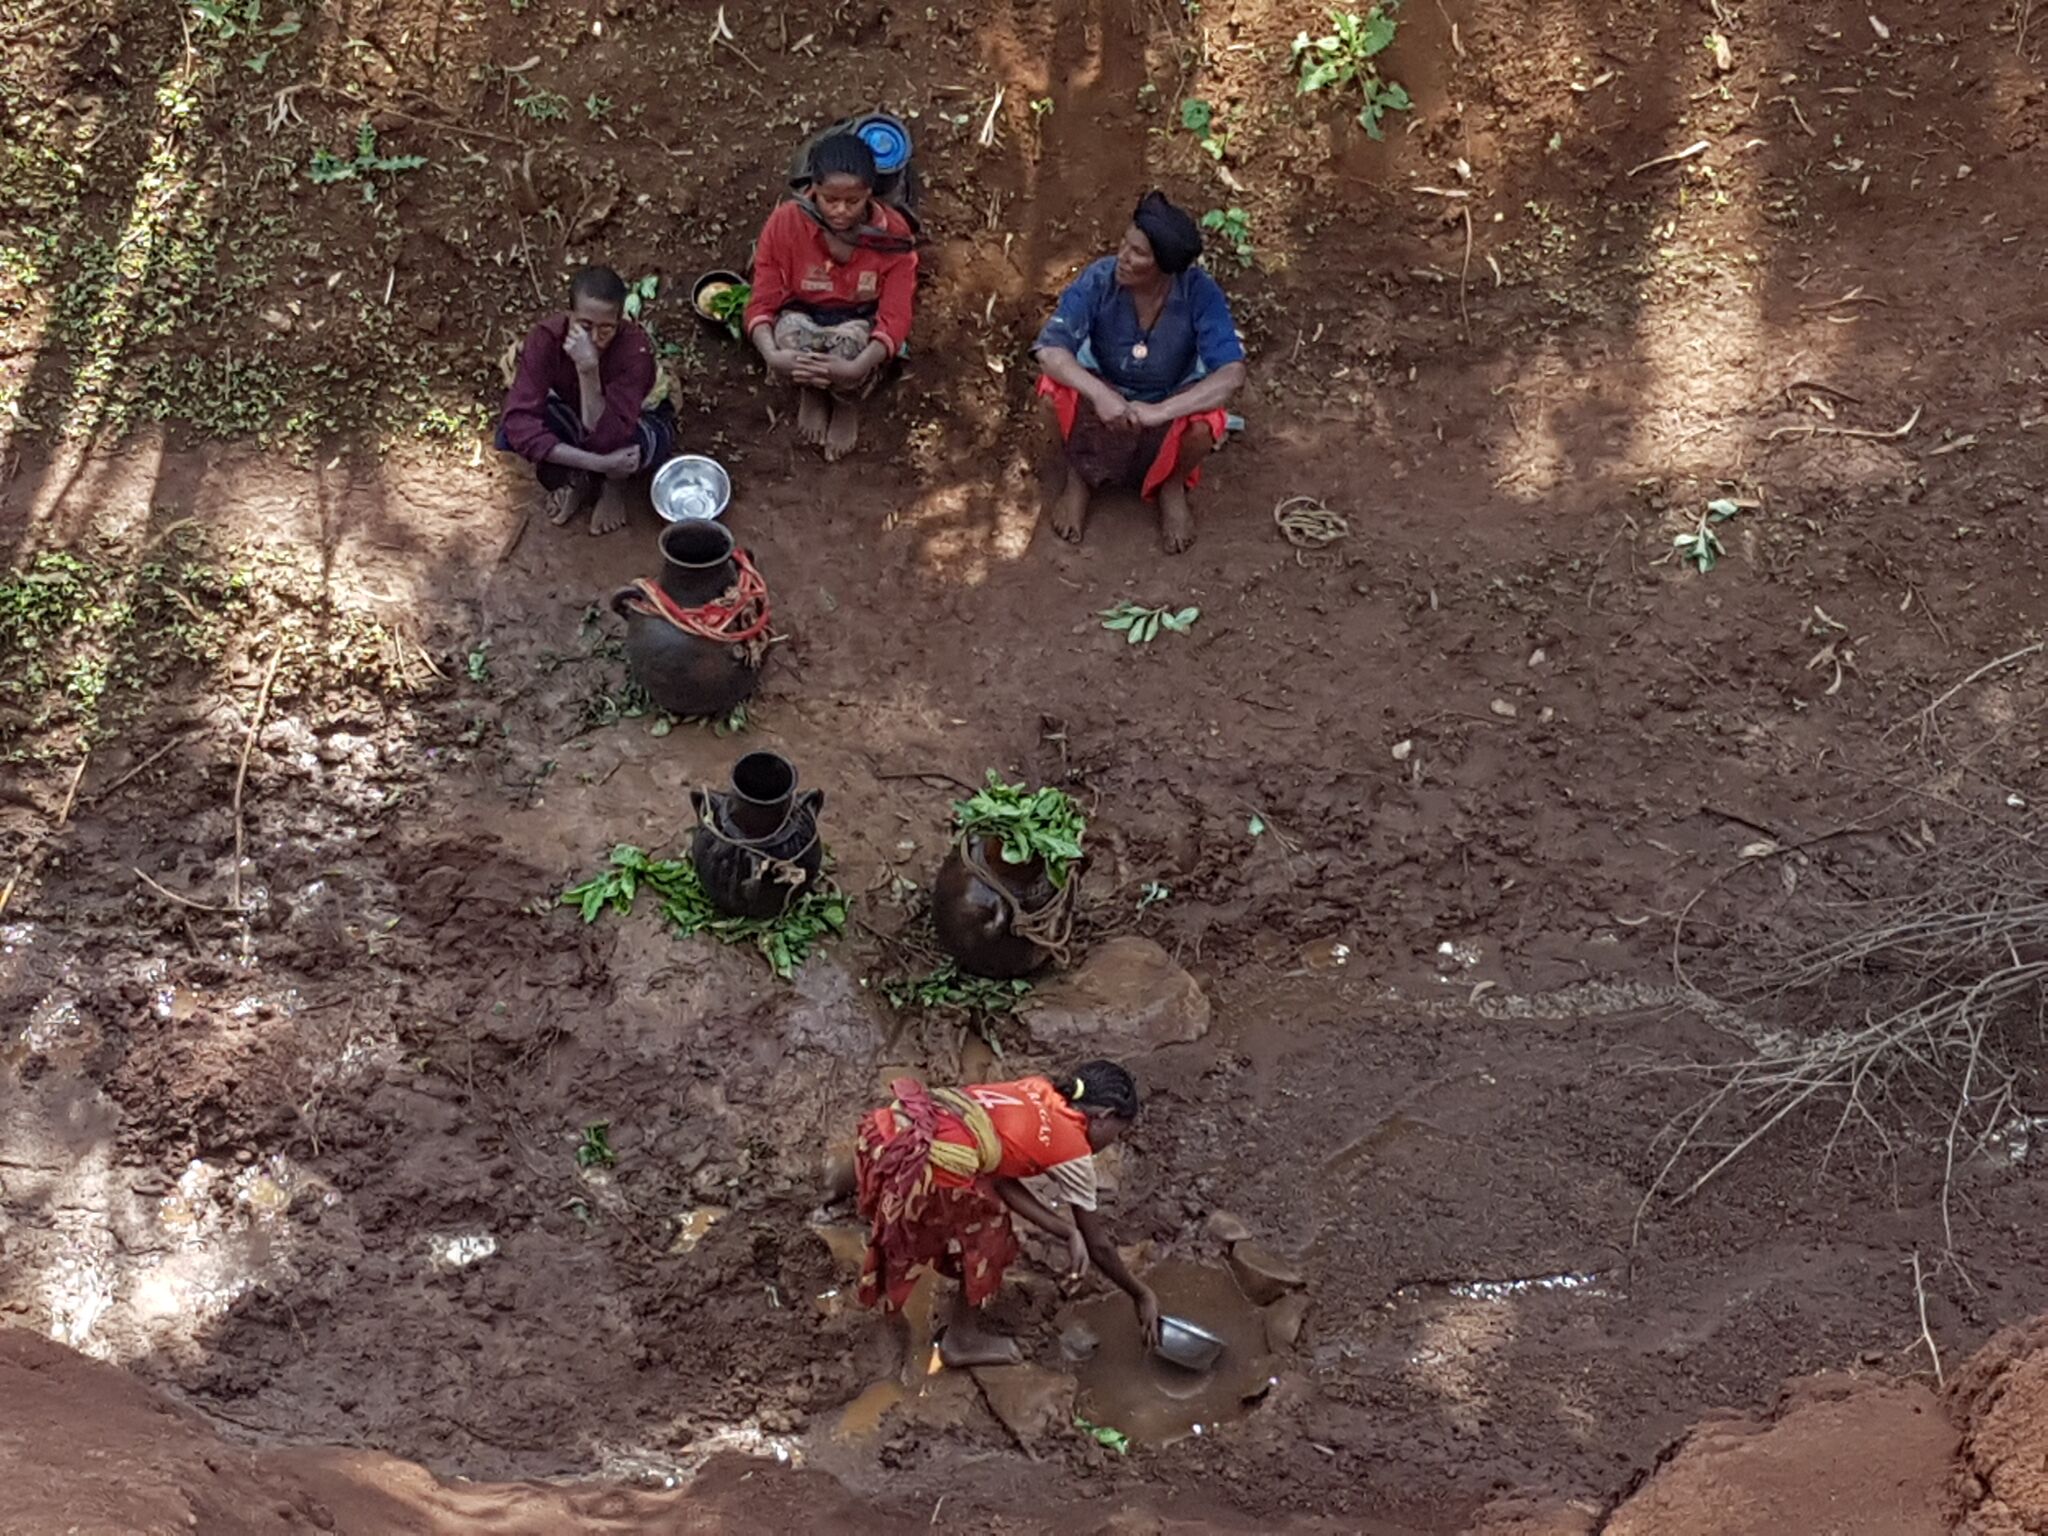 ET_A_KD_2016_06_Landscape Degradation_Community Members In Gully_©WeForest_preview